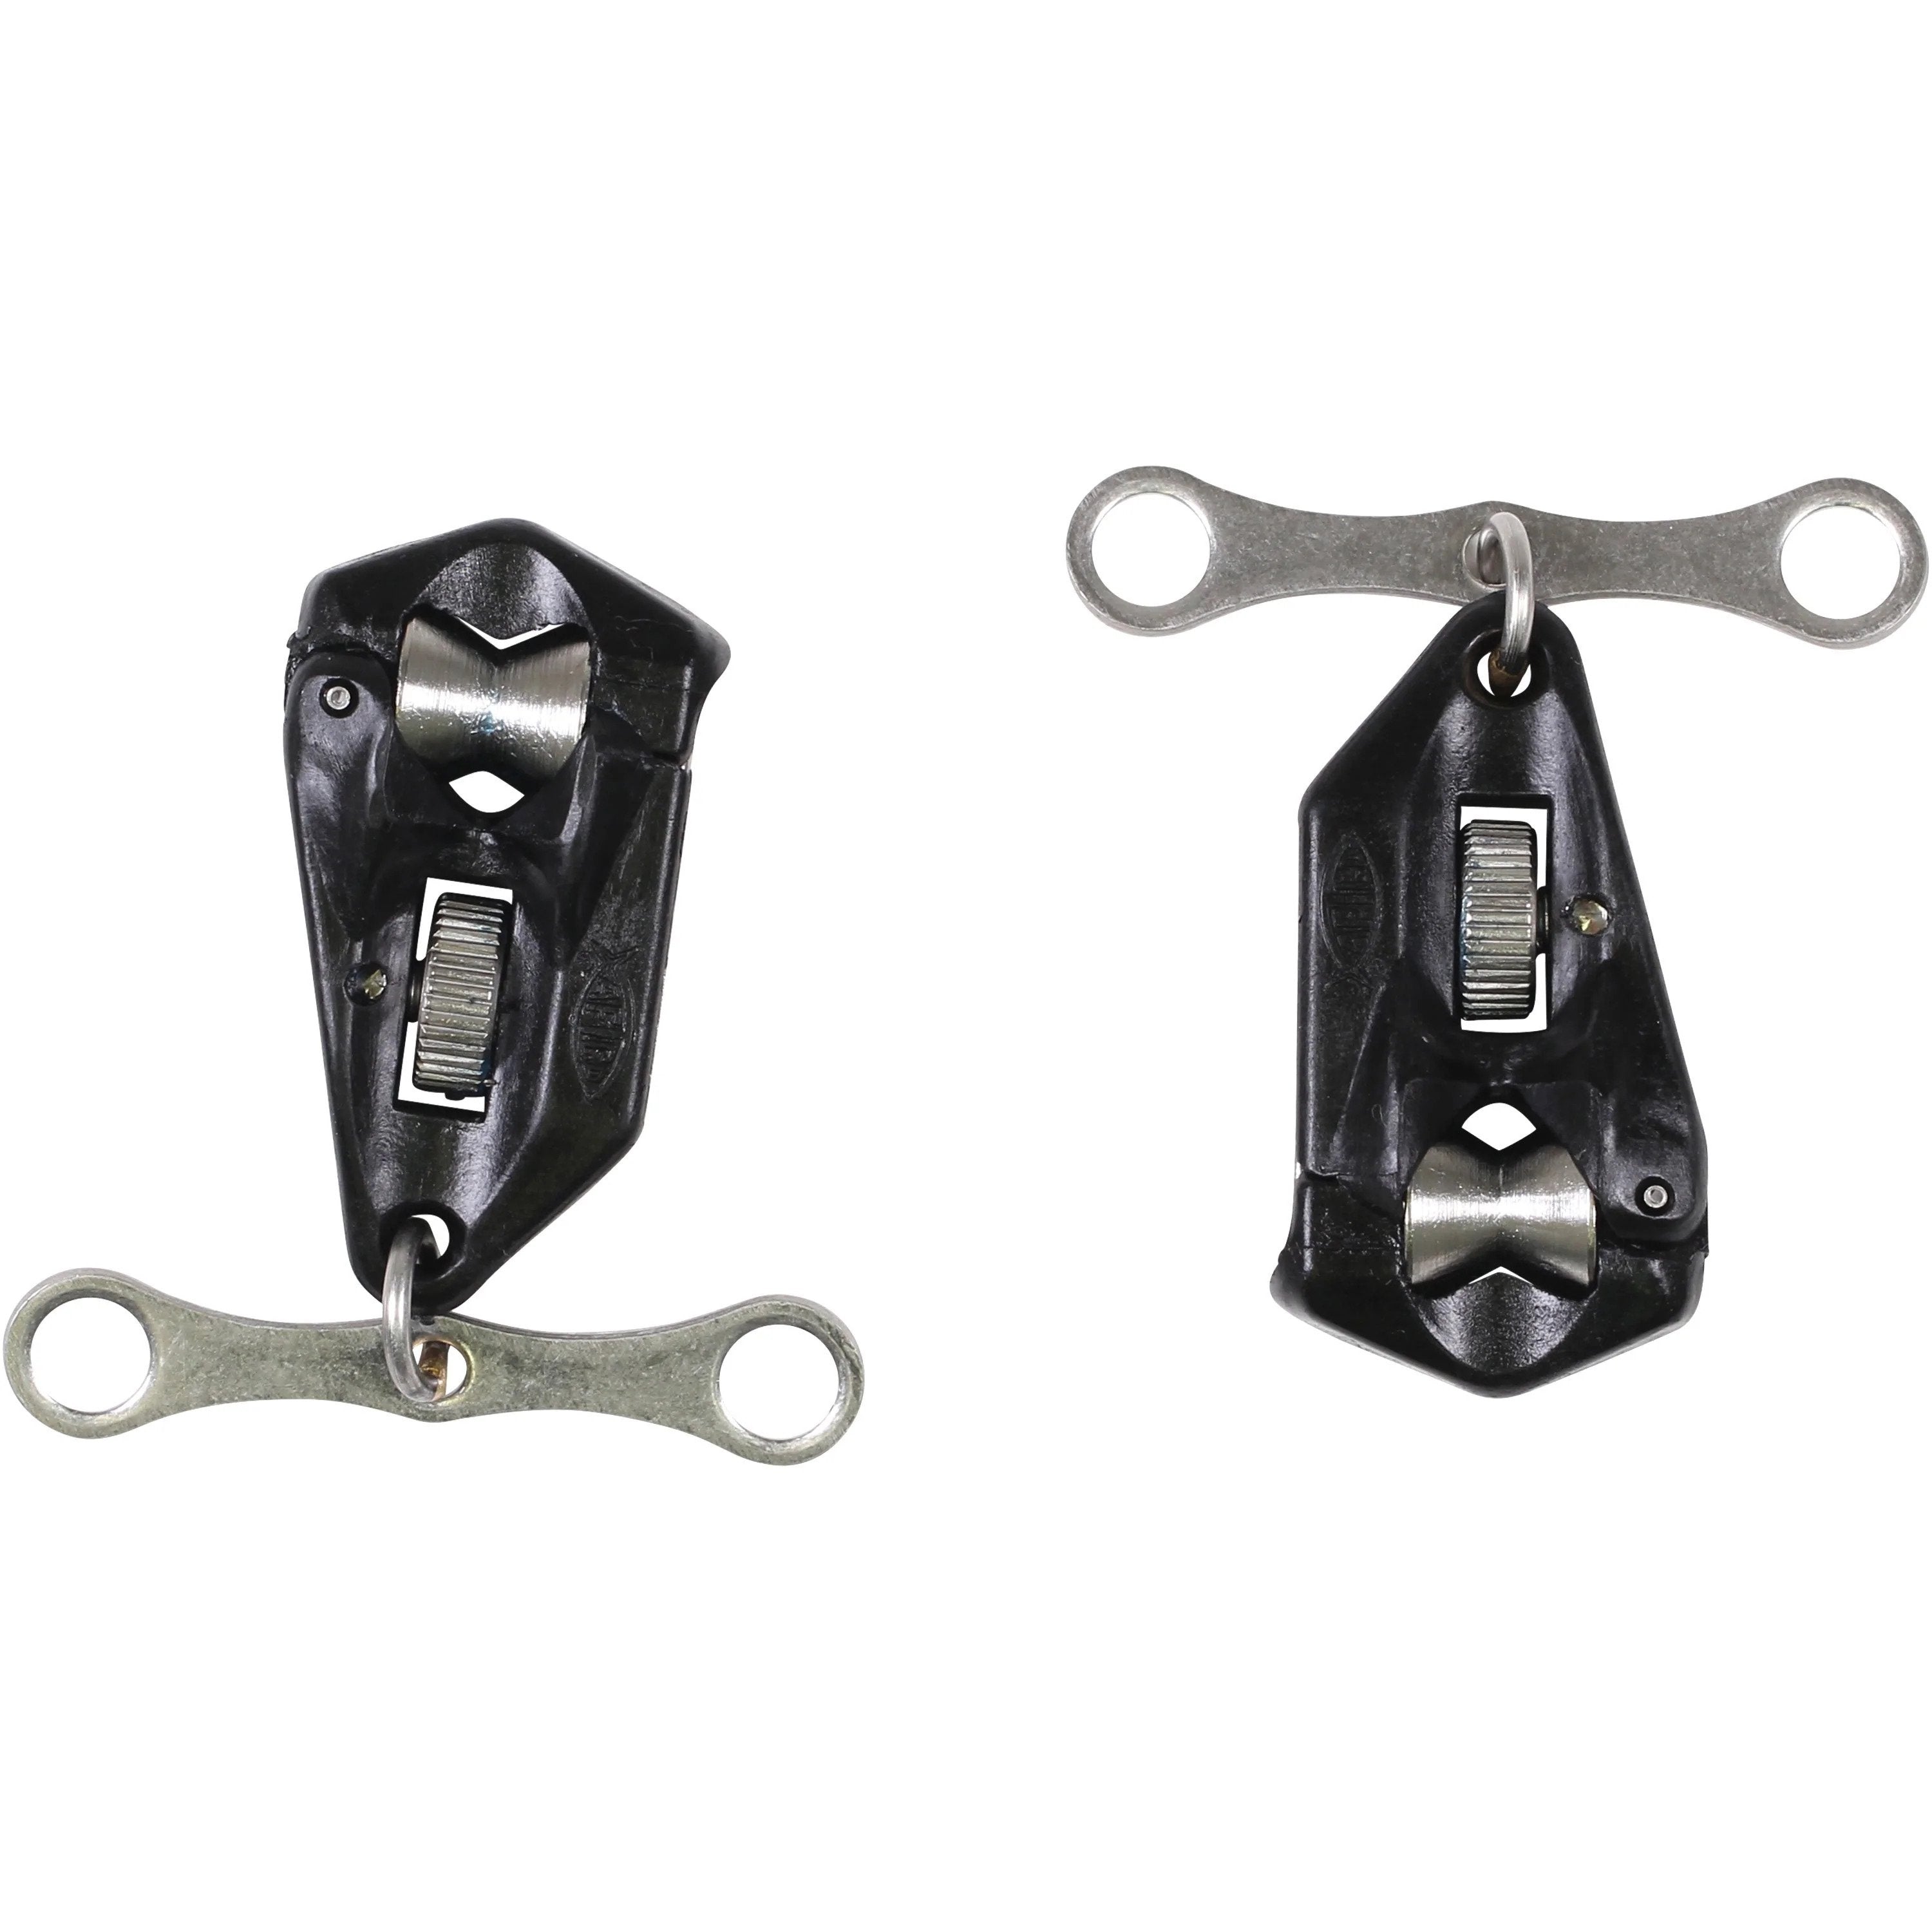 Aftco Outrigger Clips - Pair